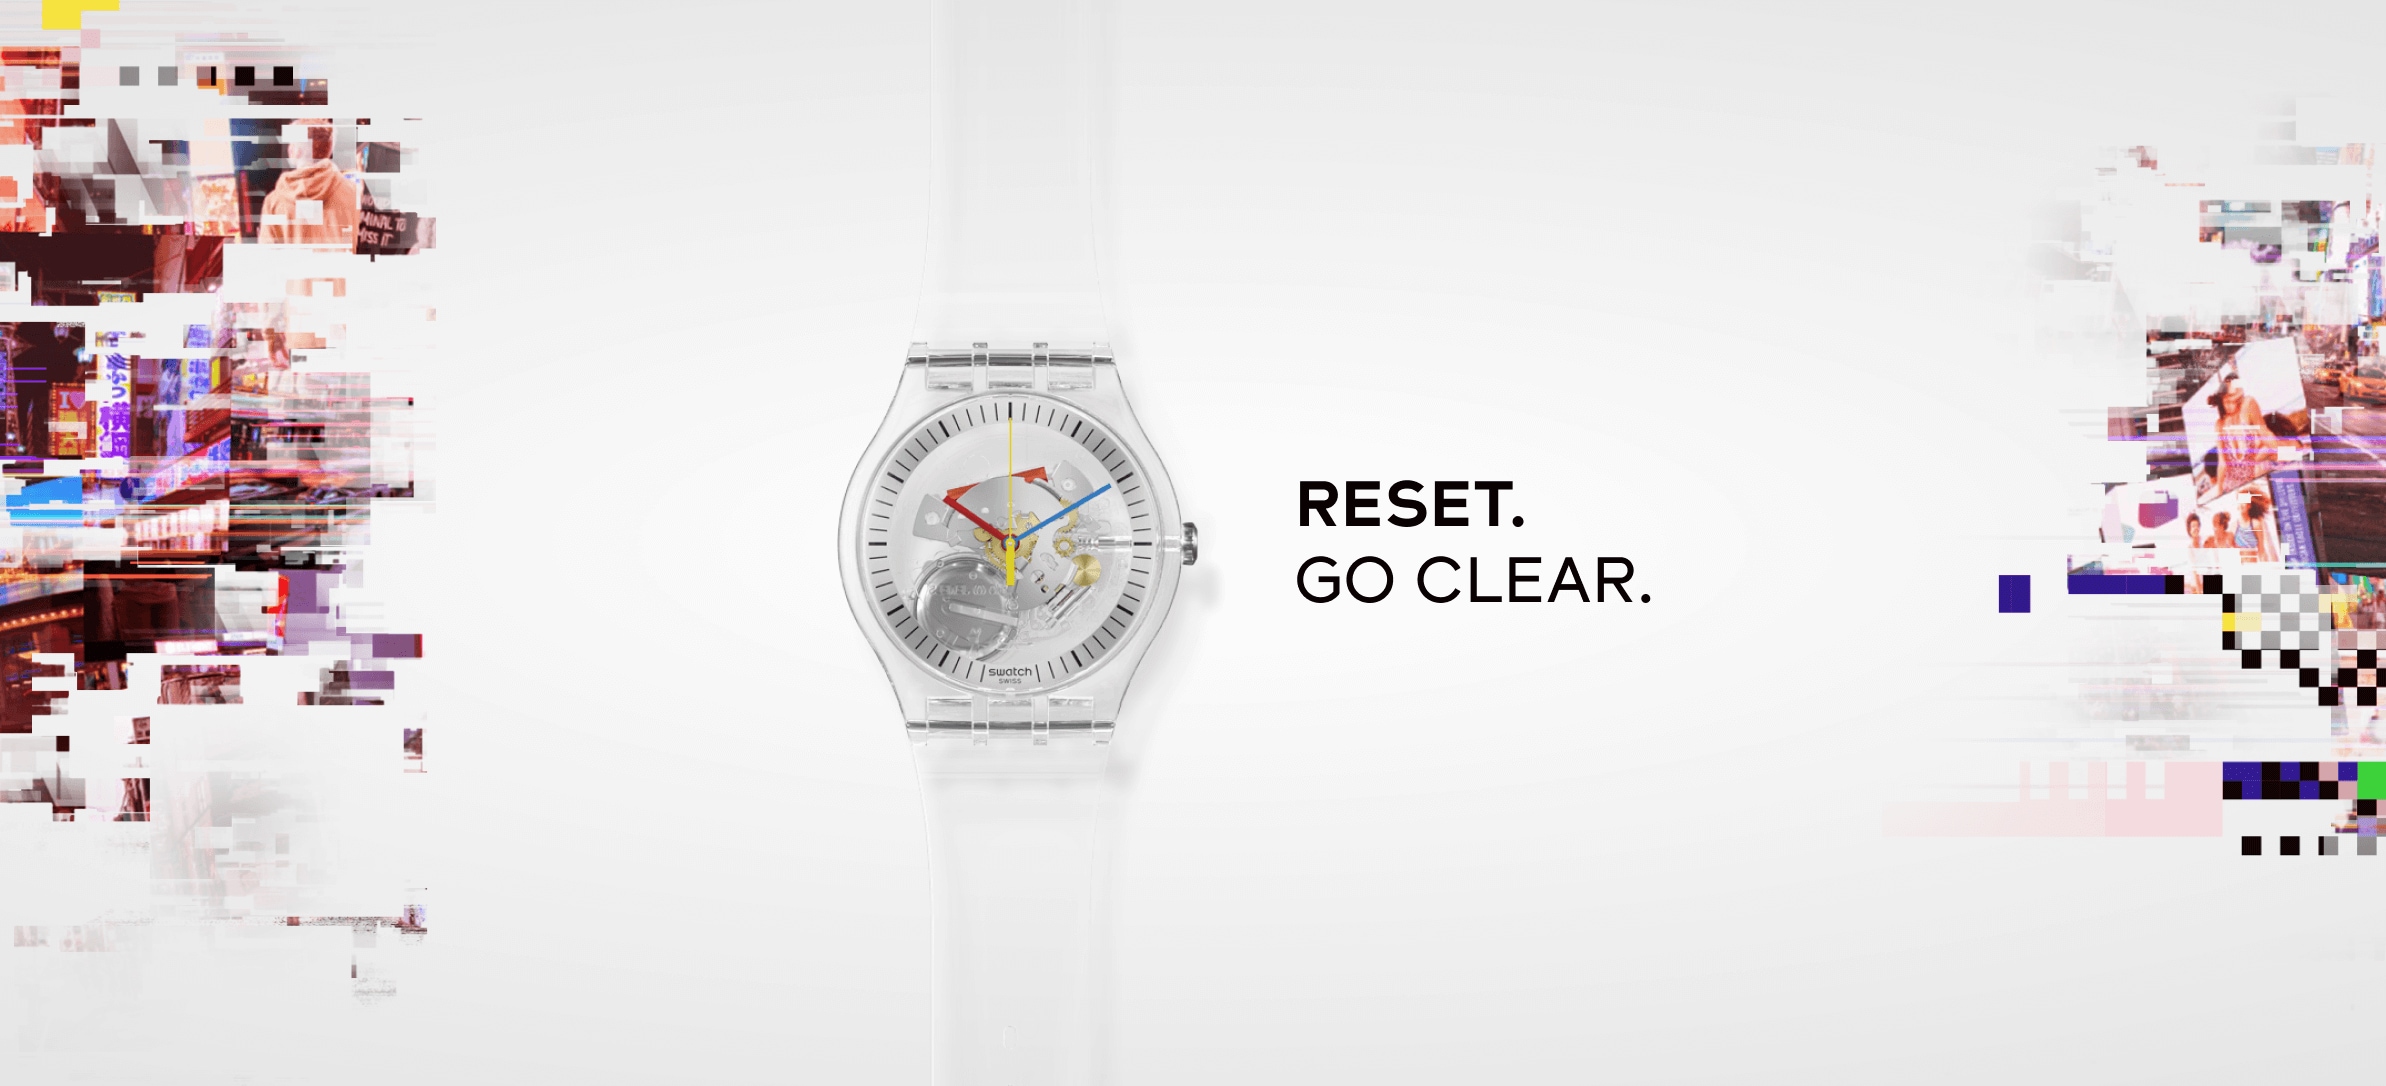 Reset. Go Clear.